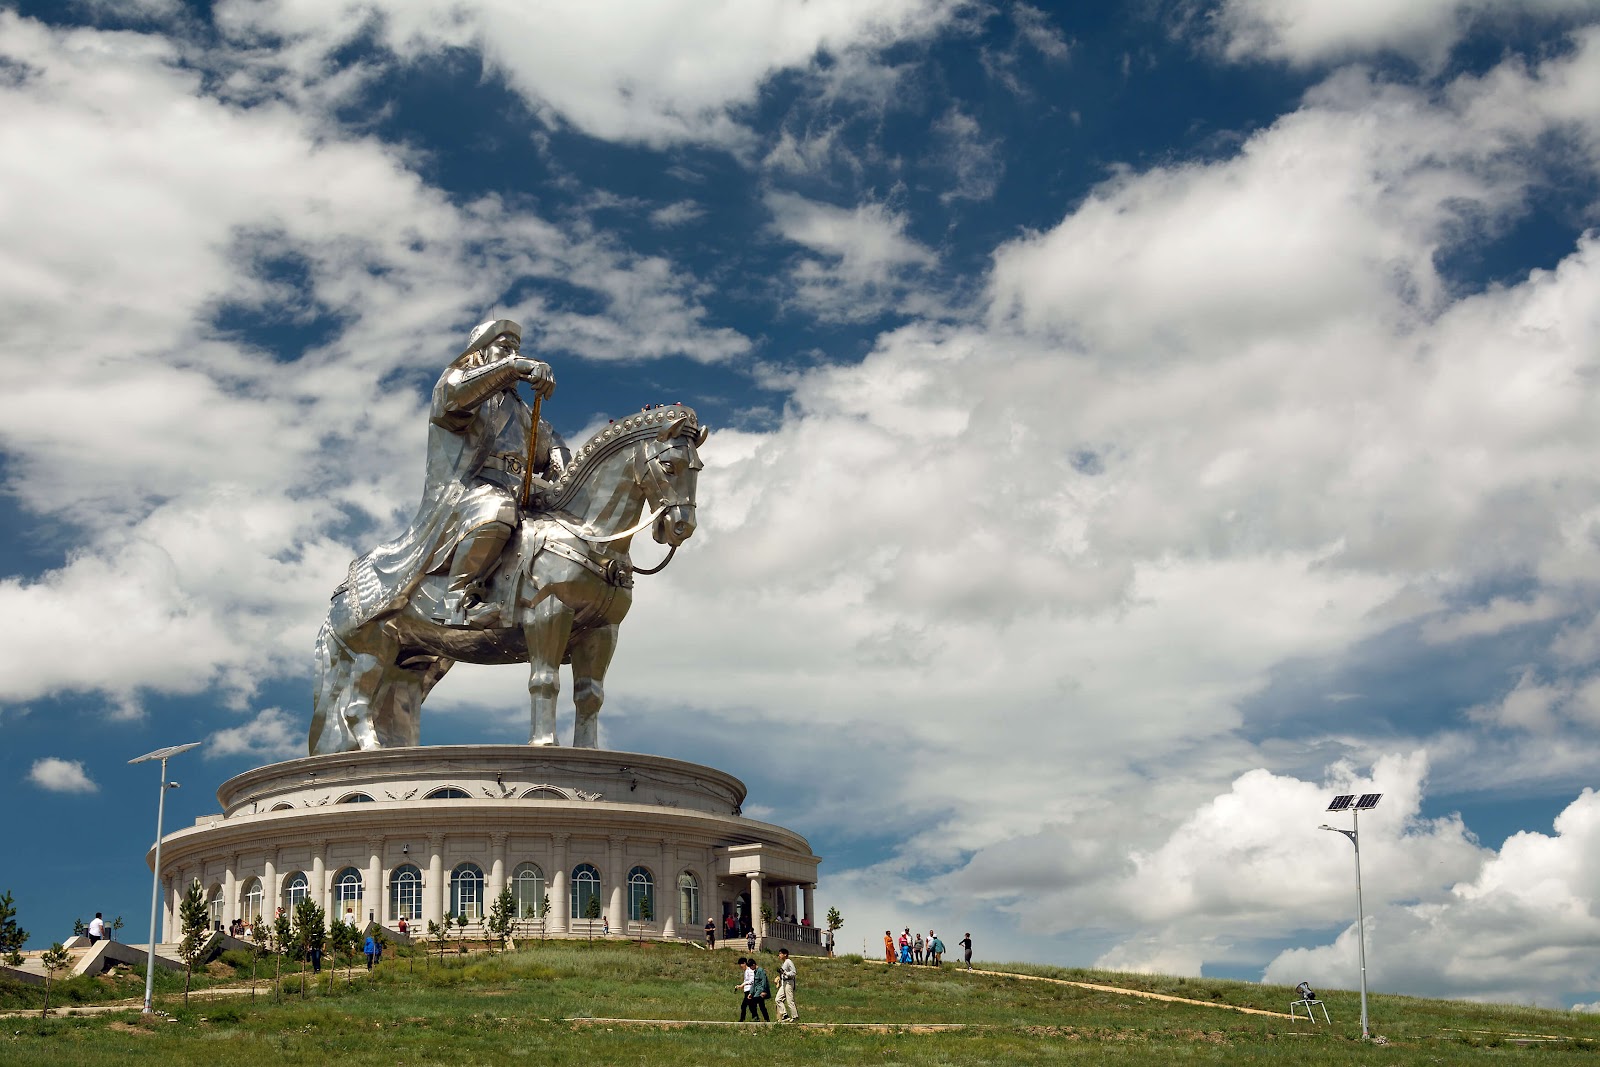 famous landmarks in Mongolia, genghis khan equestrian statue, stainless steel